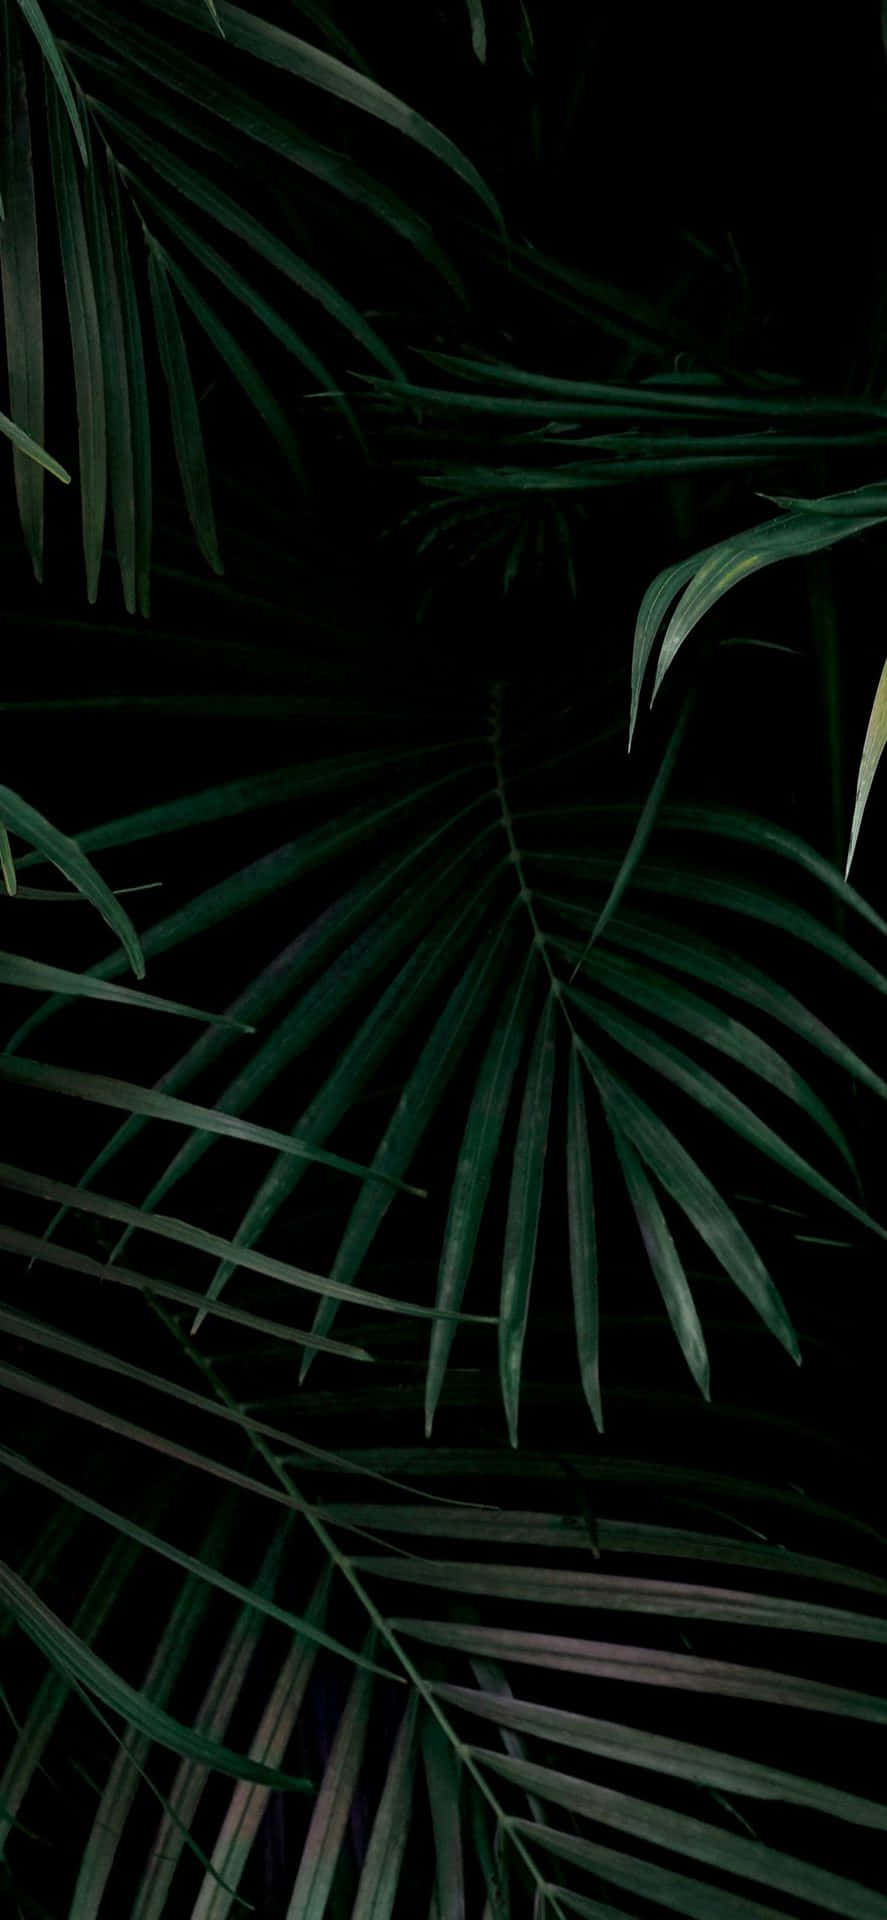 A black background with green palm leaves - Leaves